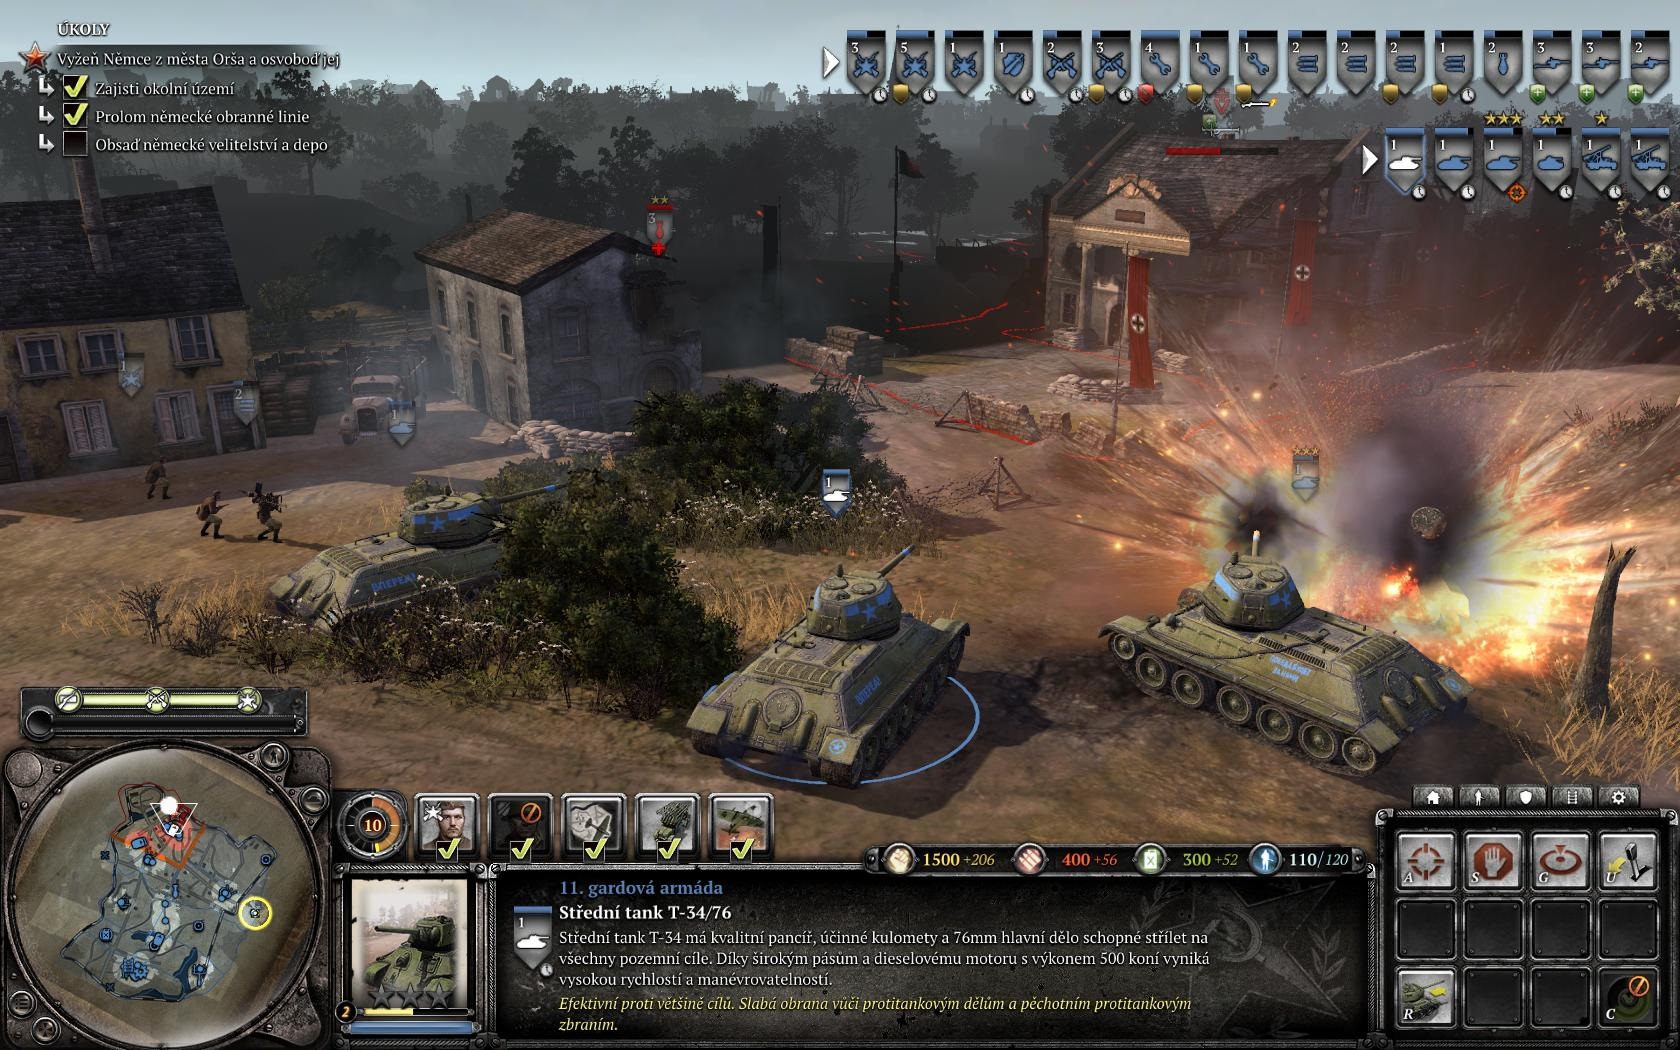 company of heroes 2 best tanks